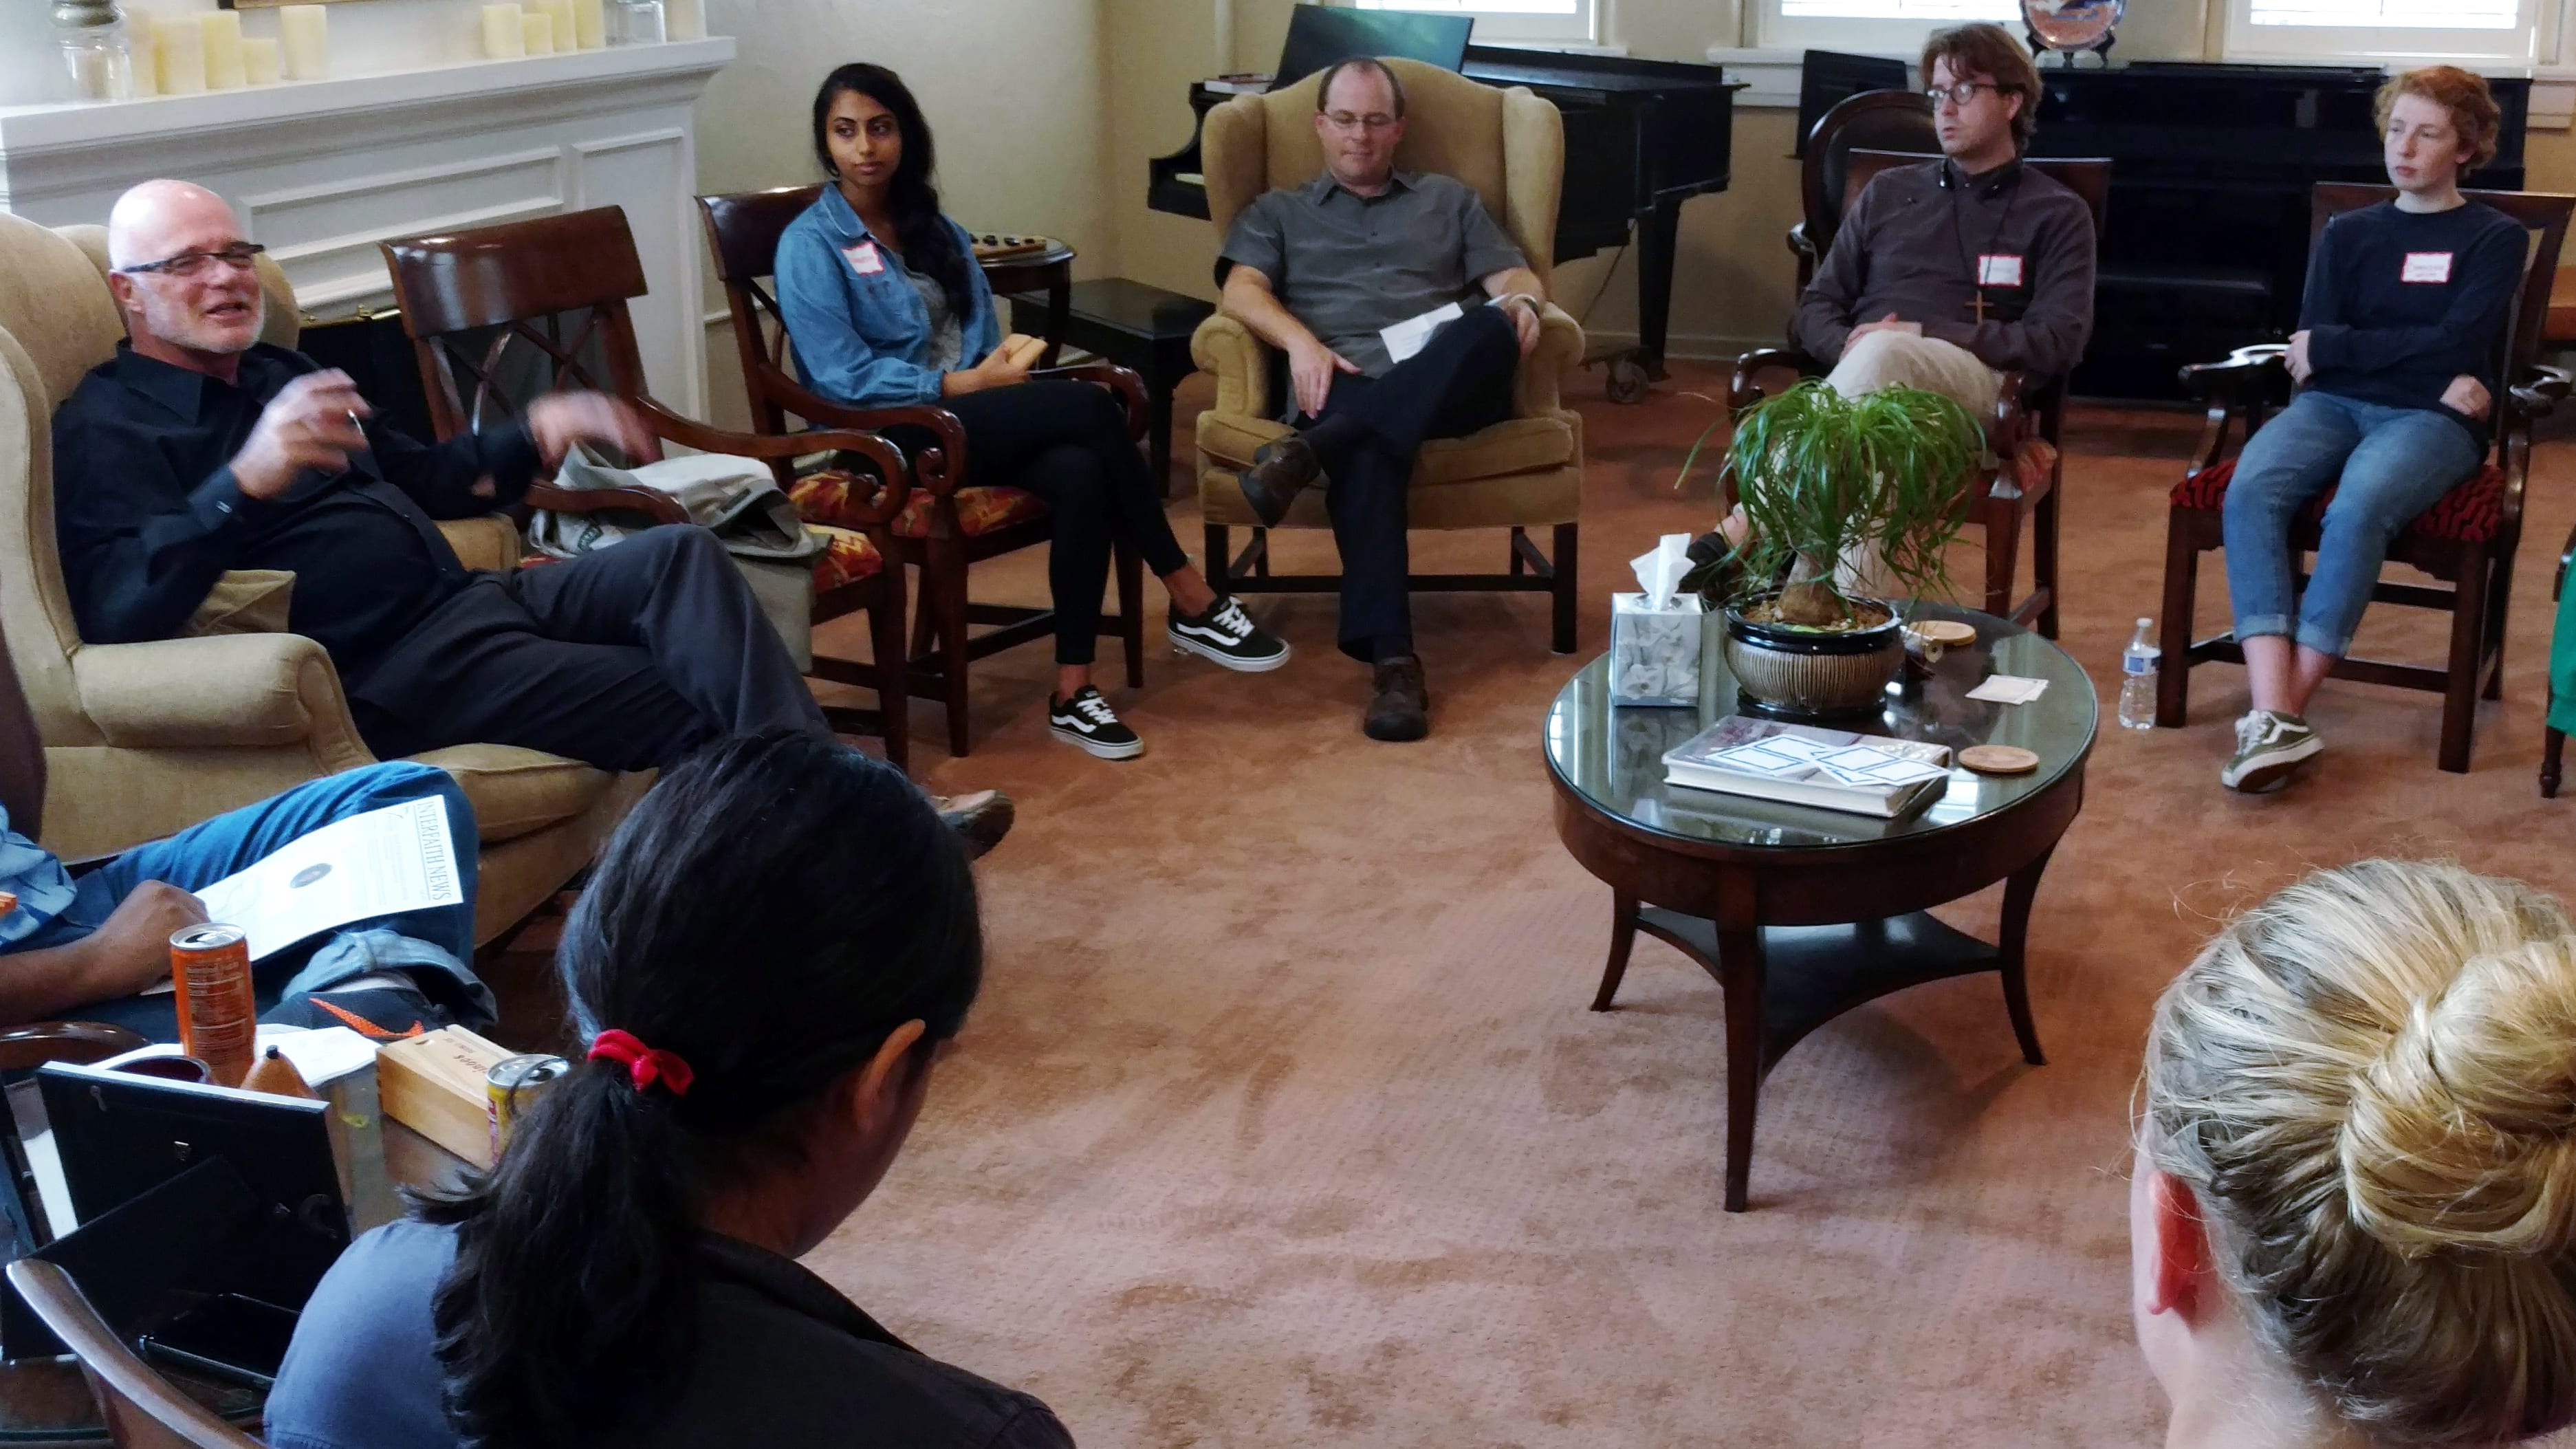 Brian McLaren meets with members and leaders of the Kansas City Interfaith Youth Alliance